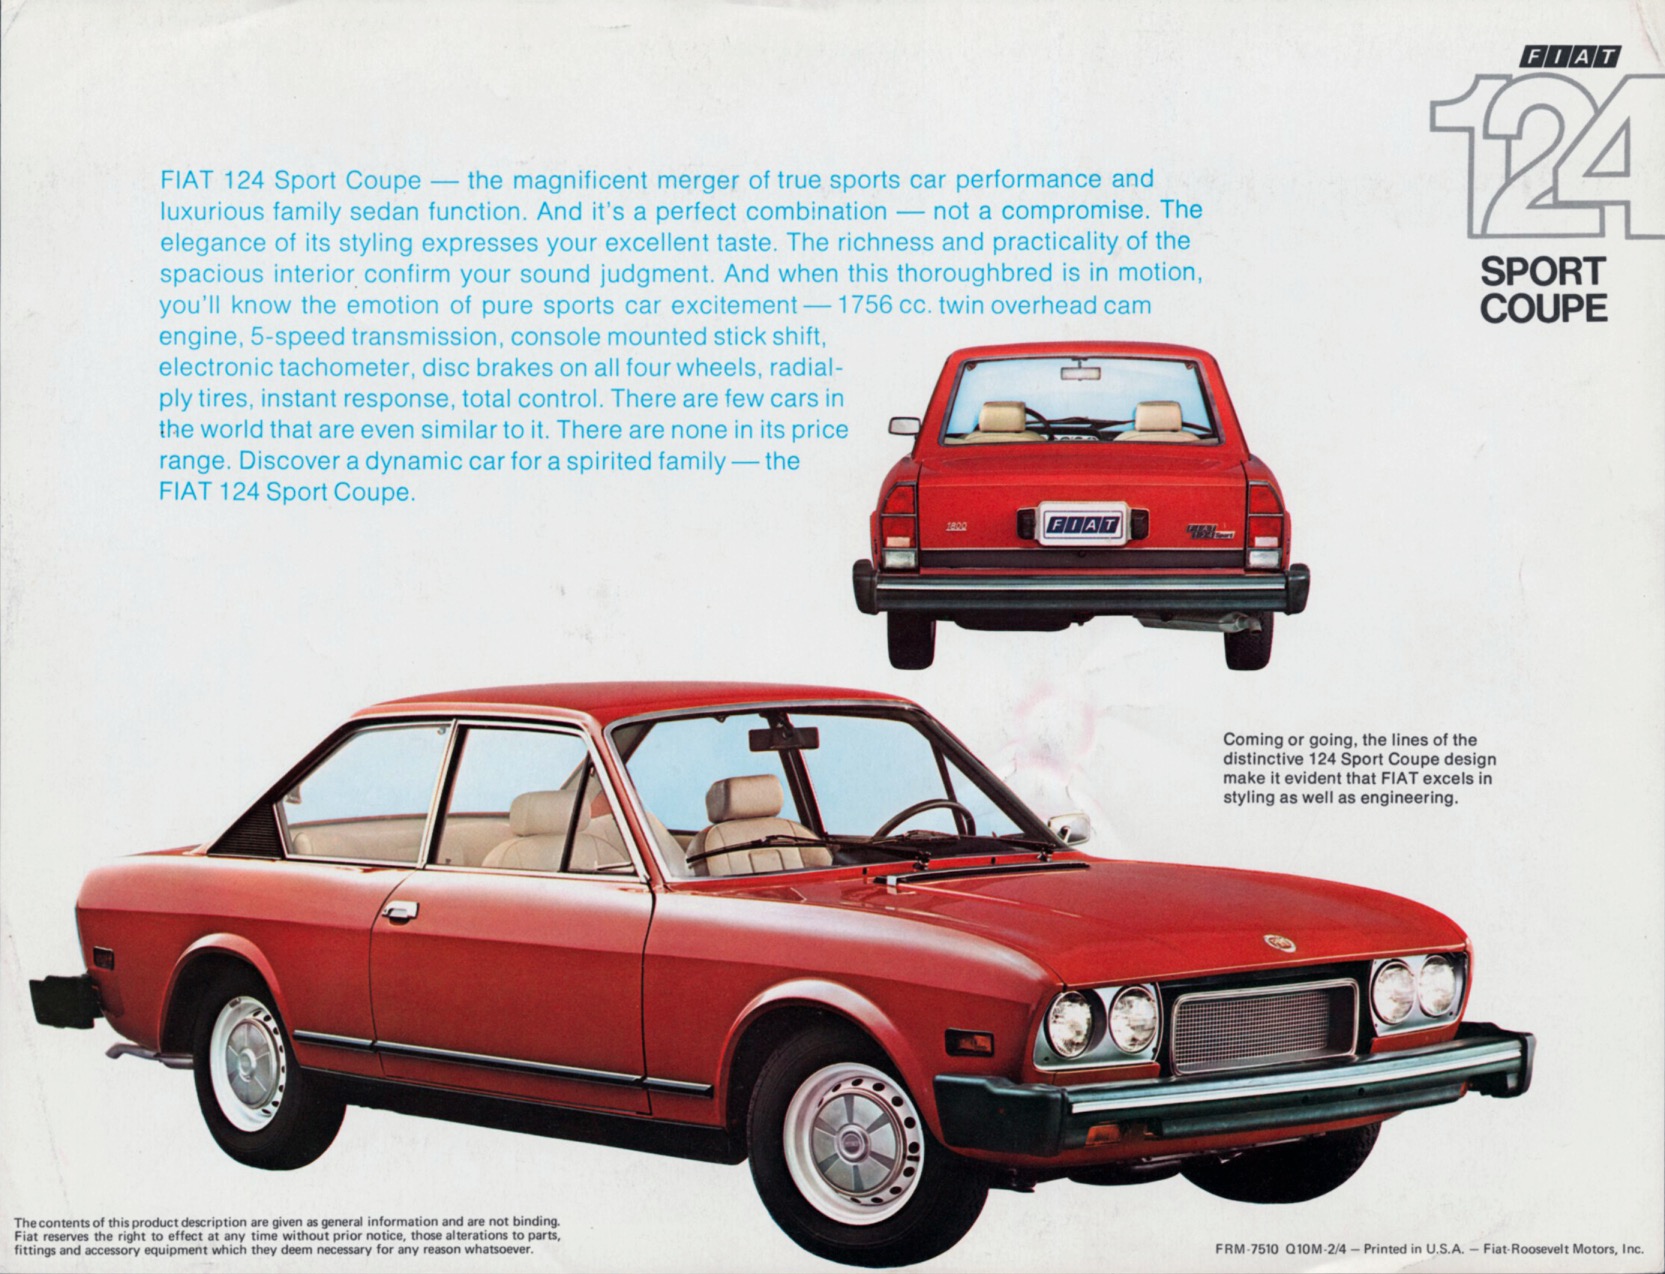 1974 Fiat 124 Sport Coupe Brochure Page 2